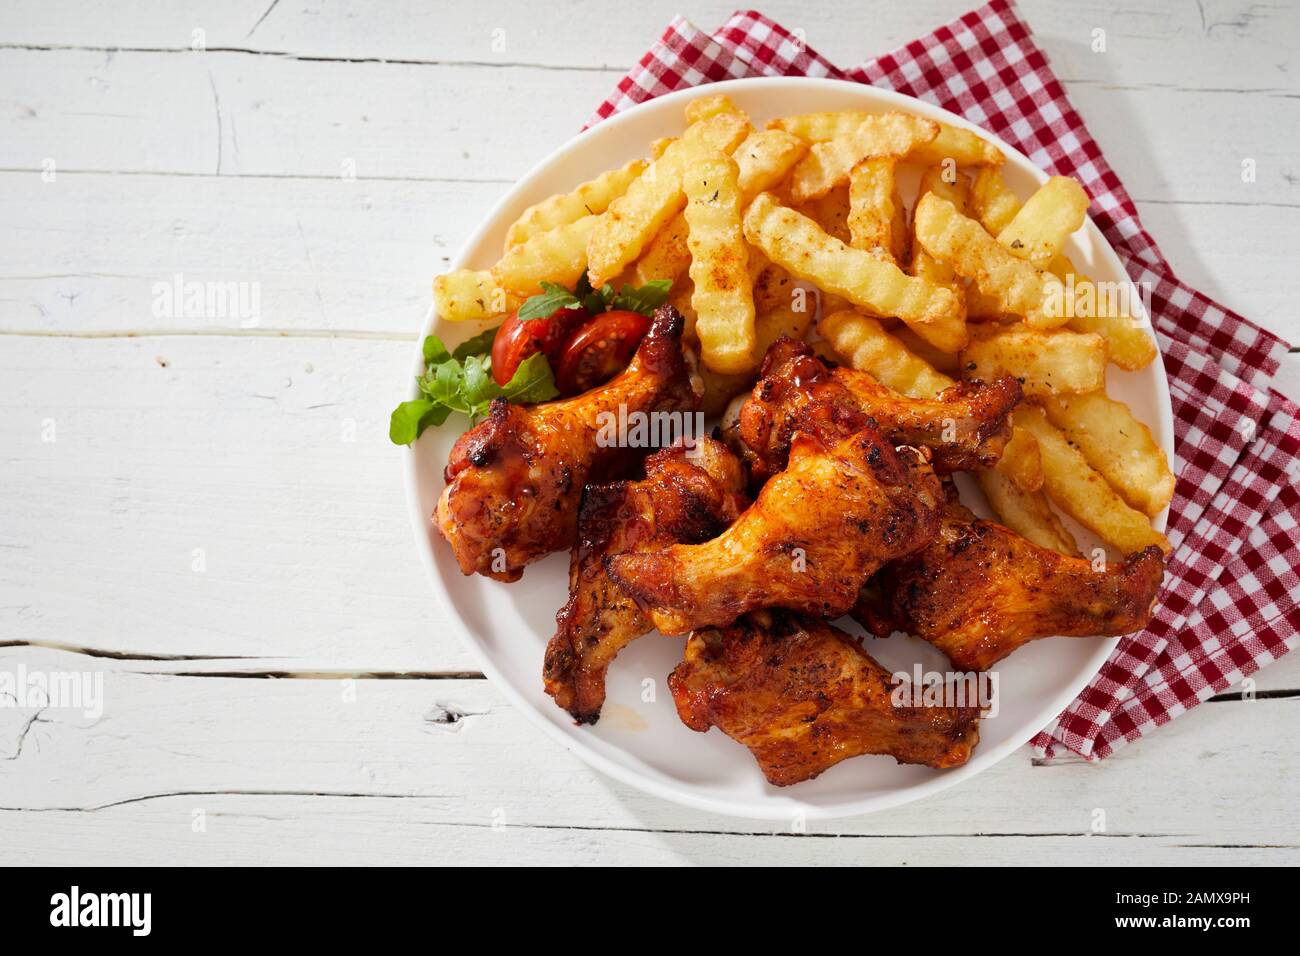 Crispy barbecued spicy chicken wings with oven baked crinkle cut potato chips and salad trimming on a plate viewed from overhead Stock Photo